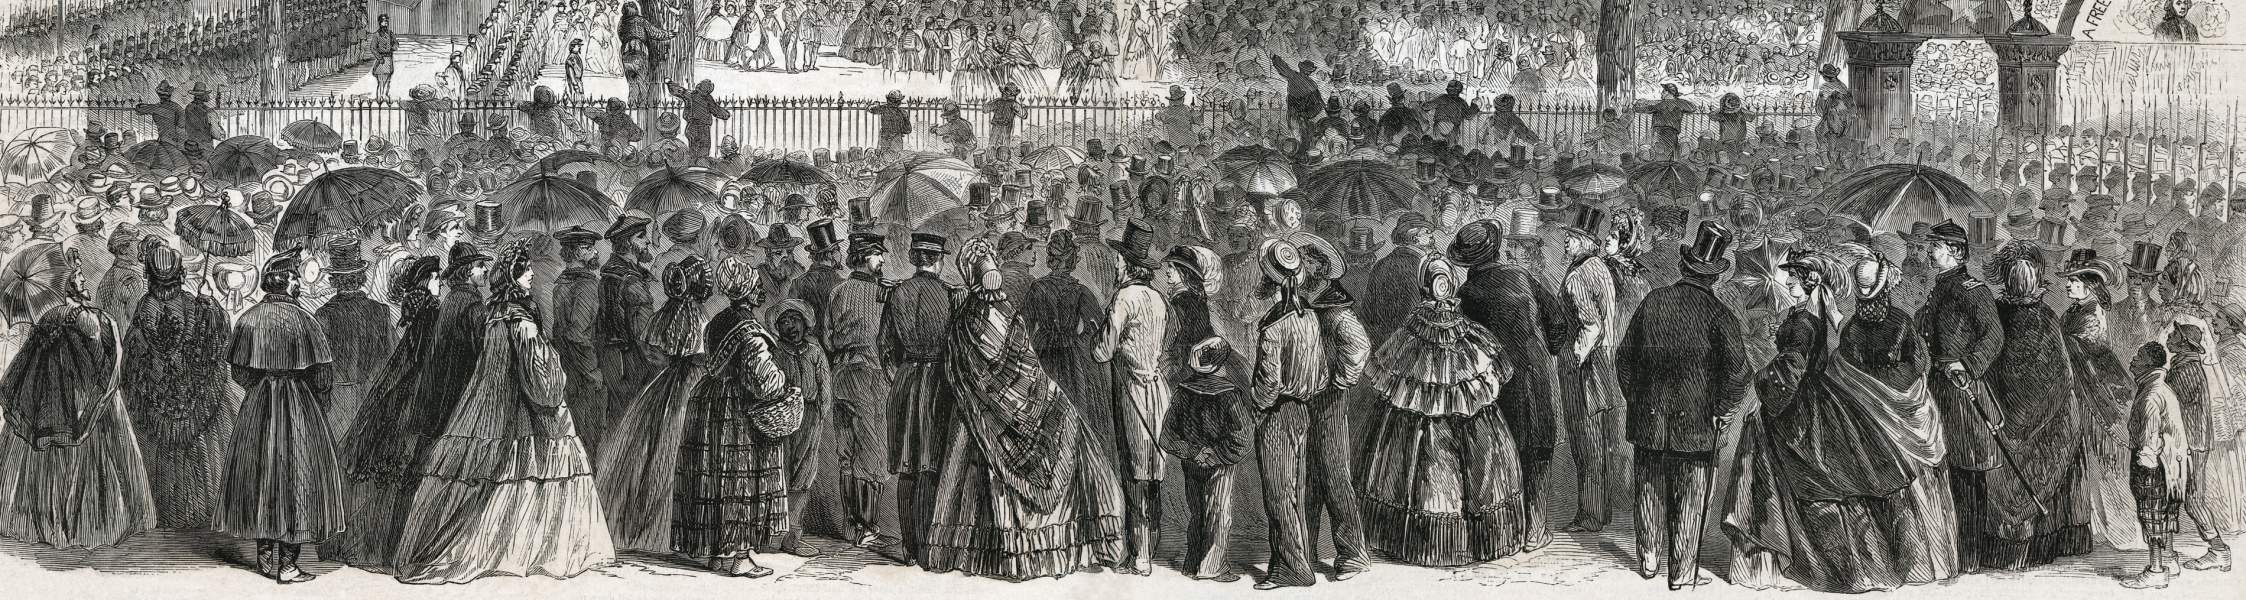 Inauguration of Governor Michael Hahn, New Orleans, Louisiana, March 4, 1864, artist's impression, zoomable image, detail